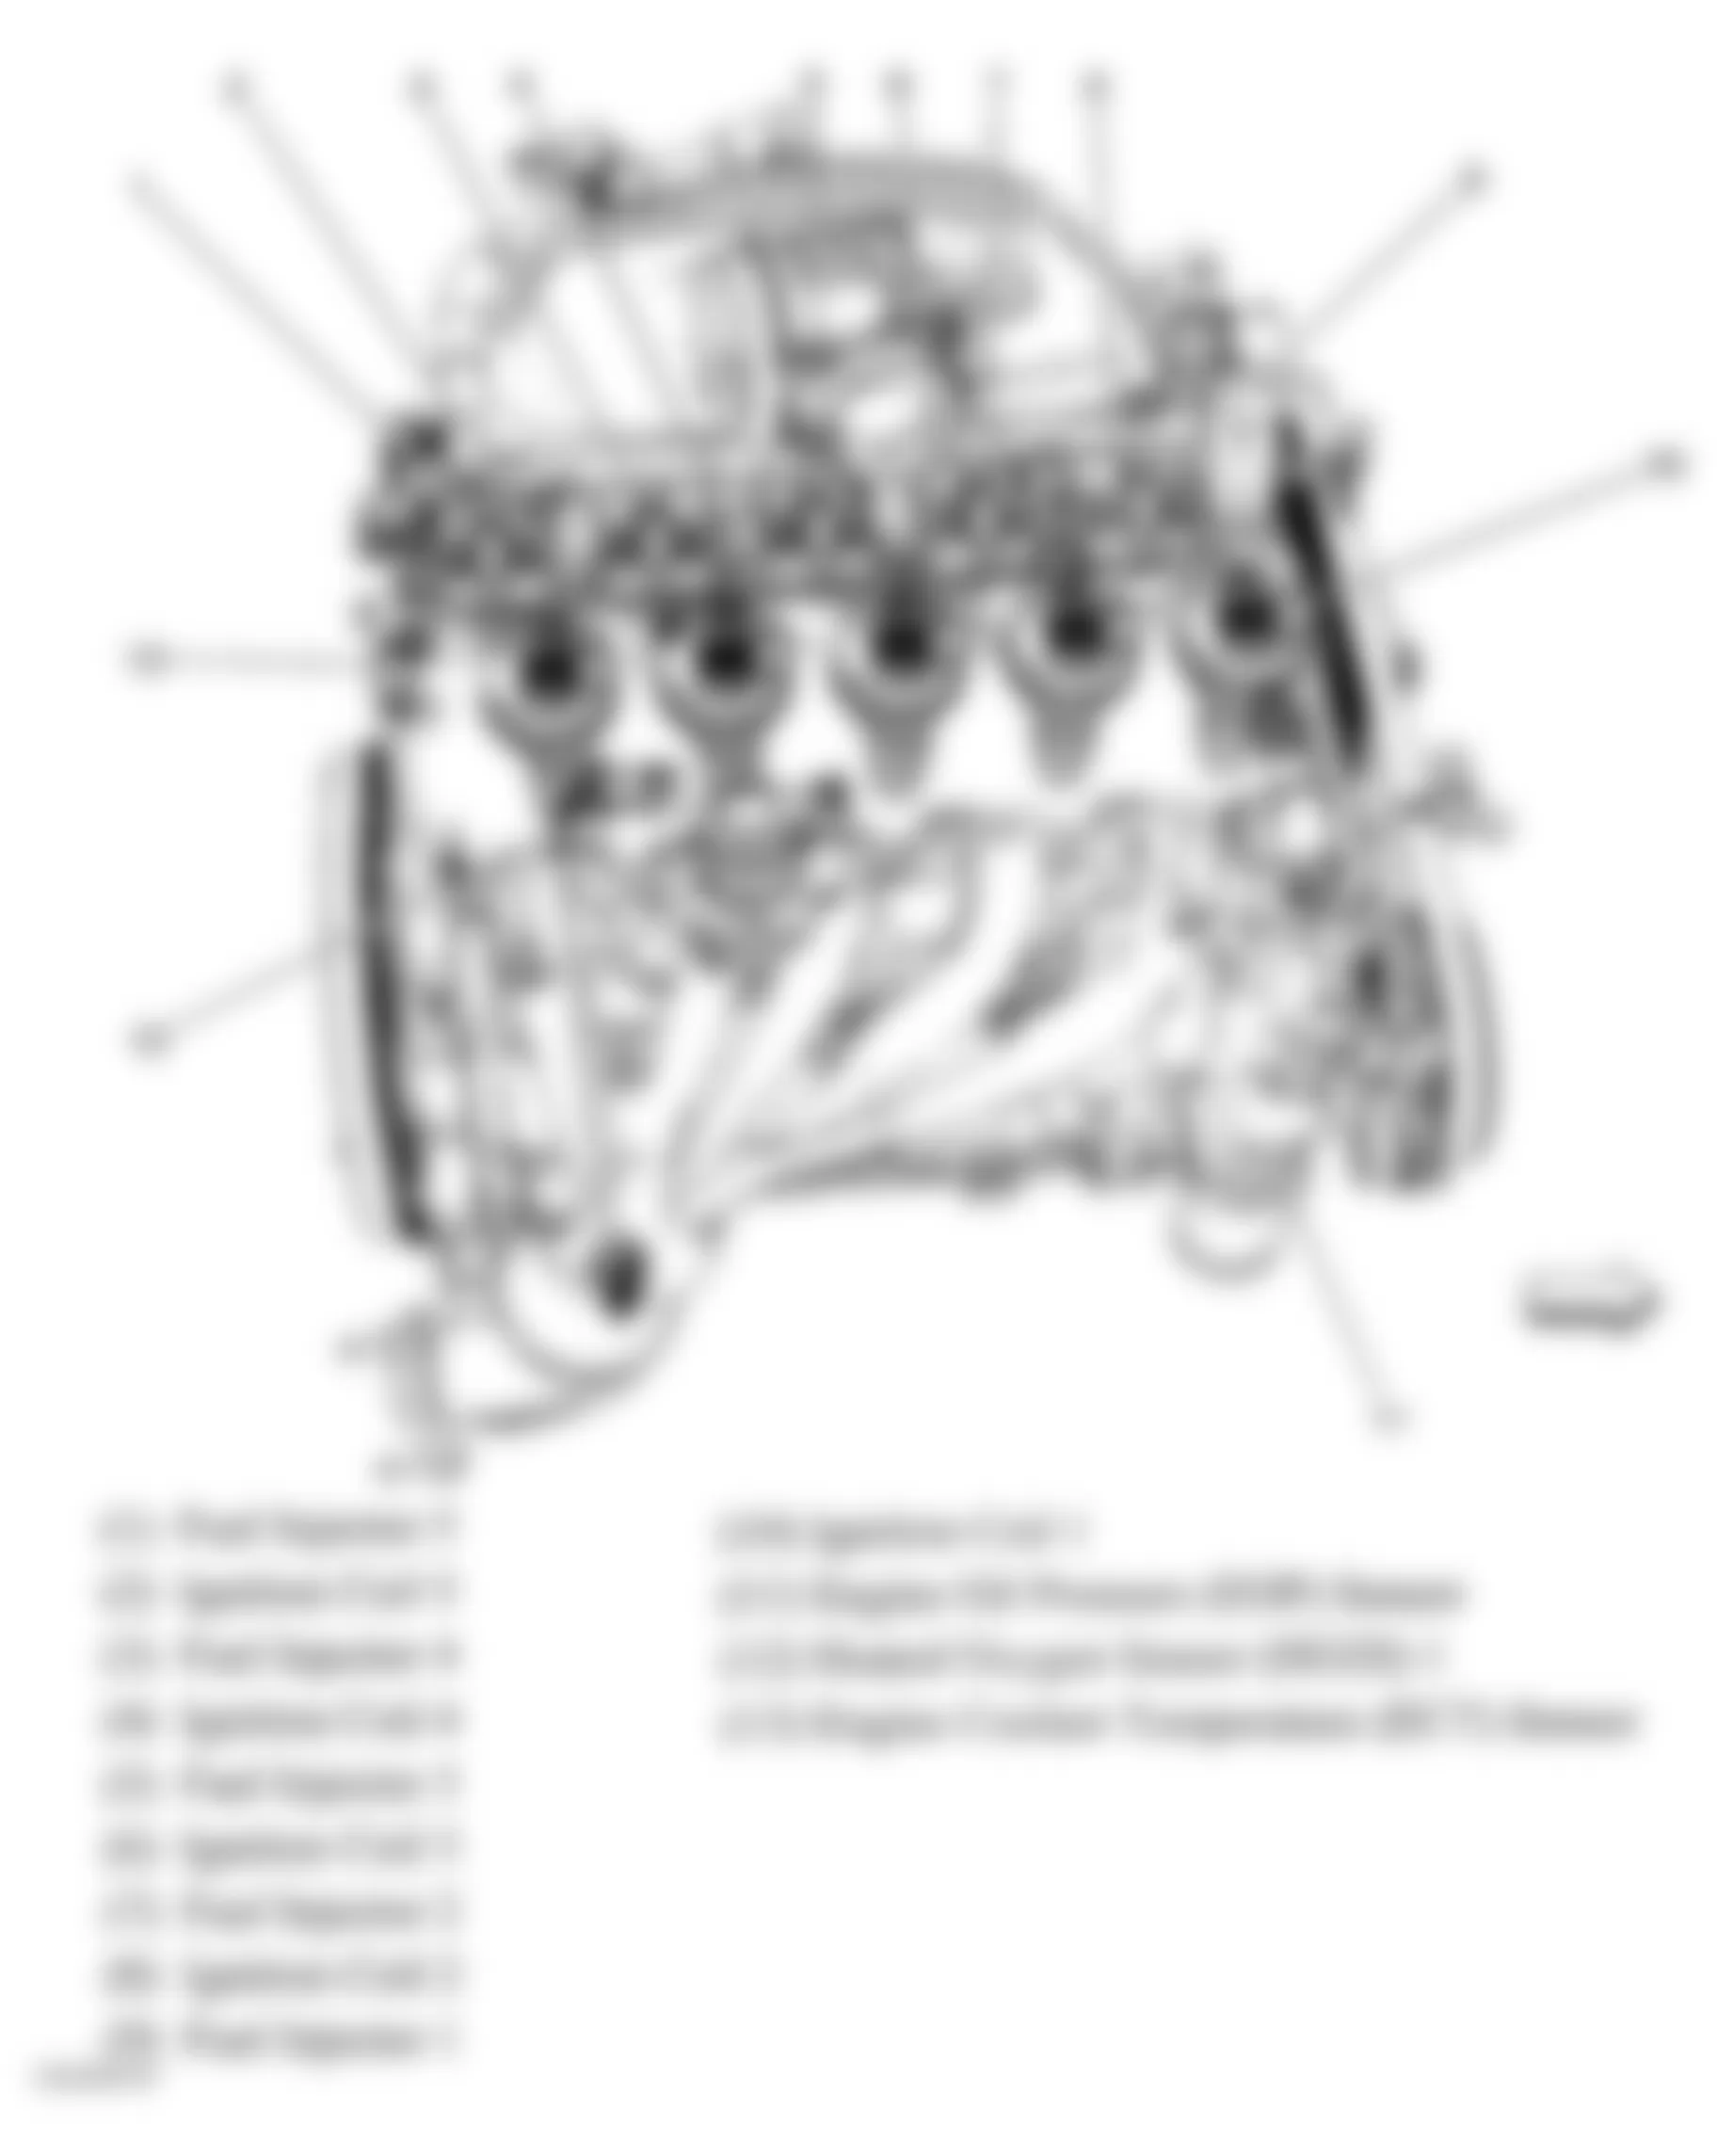 Isuzu i-290 S 2008 - Component Locations -  Top View Of Engine (3.7L)